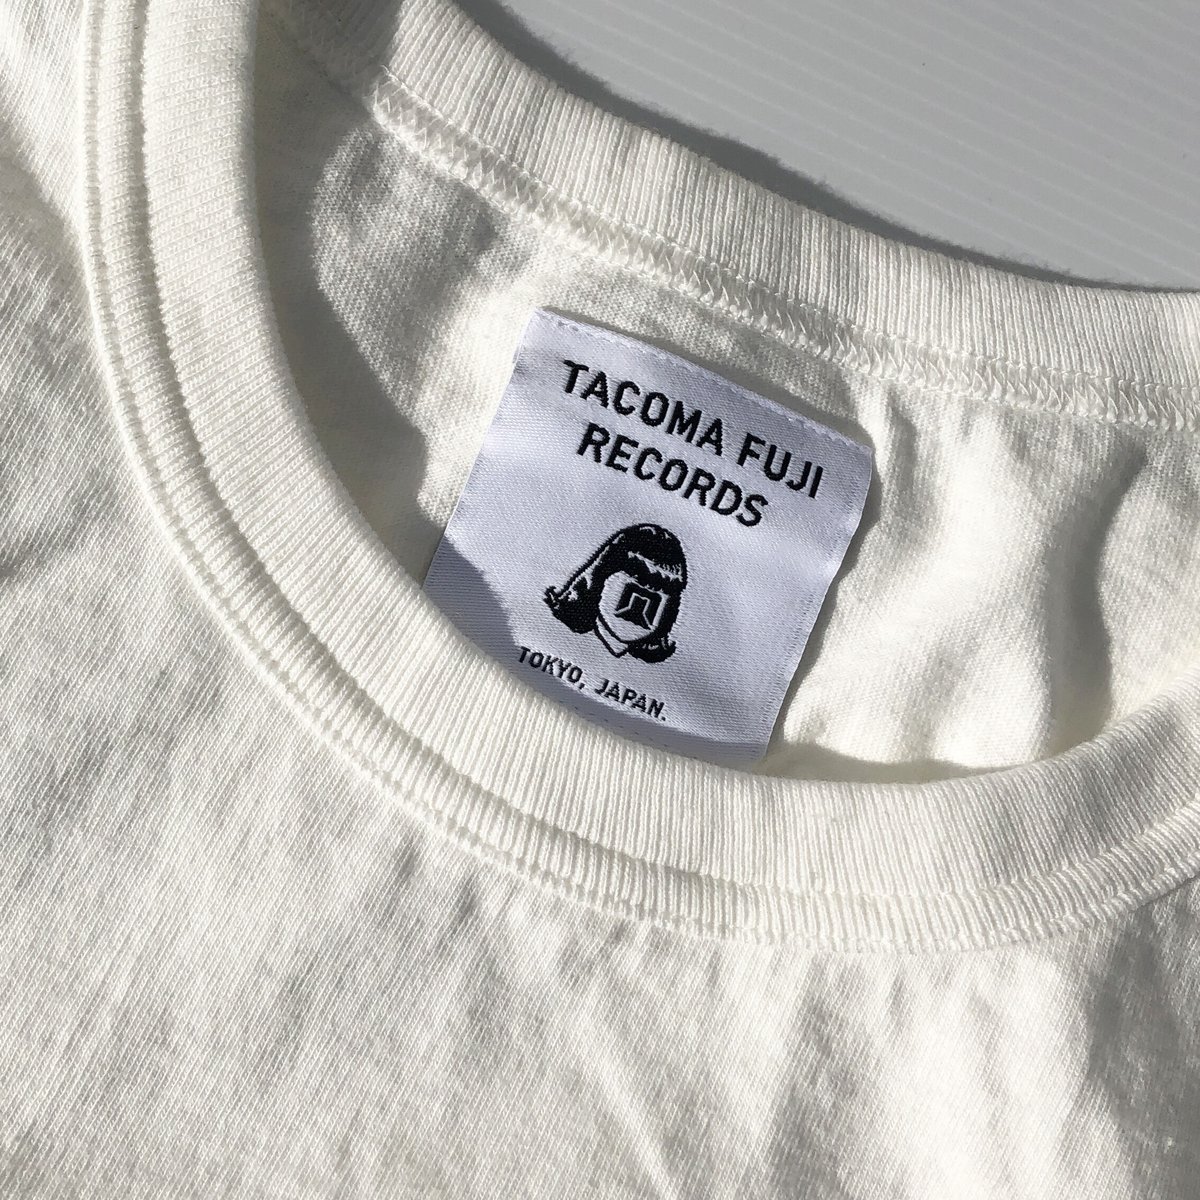 PACK LIST REVIEW T / TACOMA FUJI ジェリー鵜飼